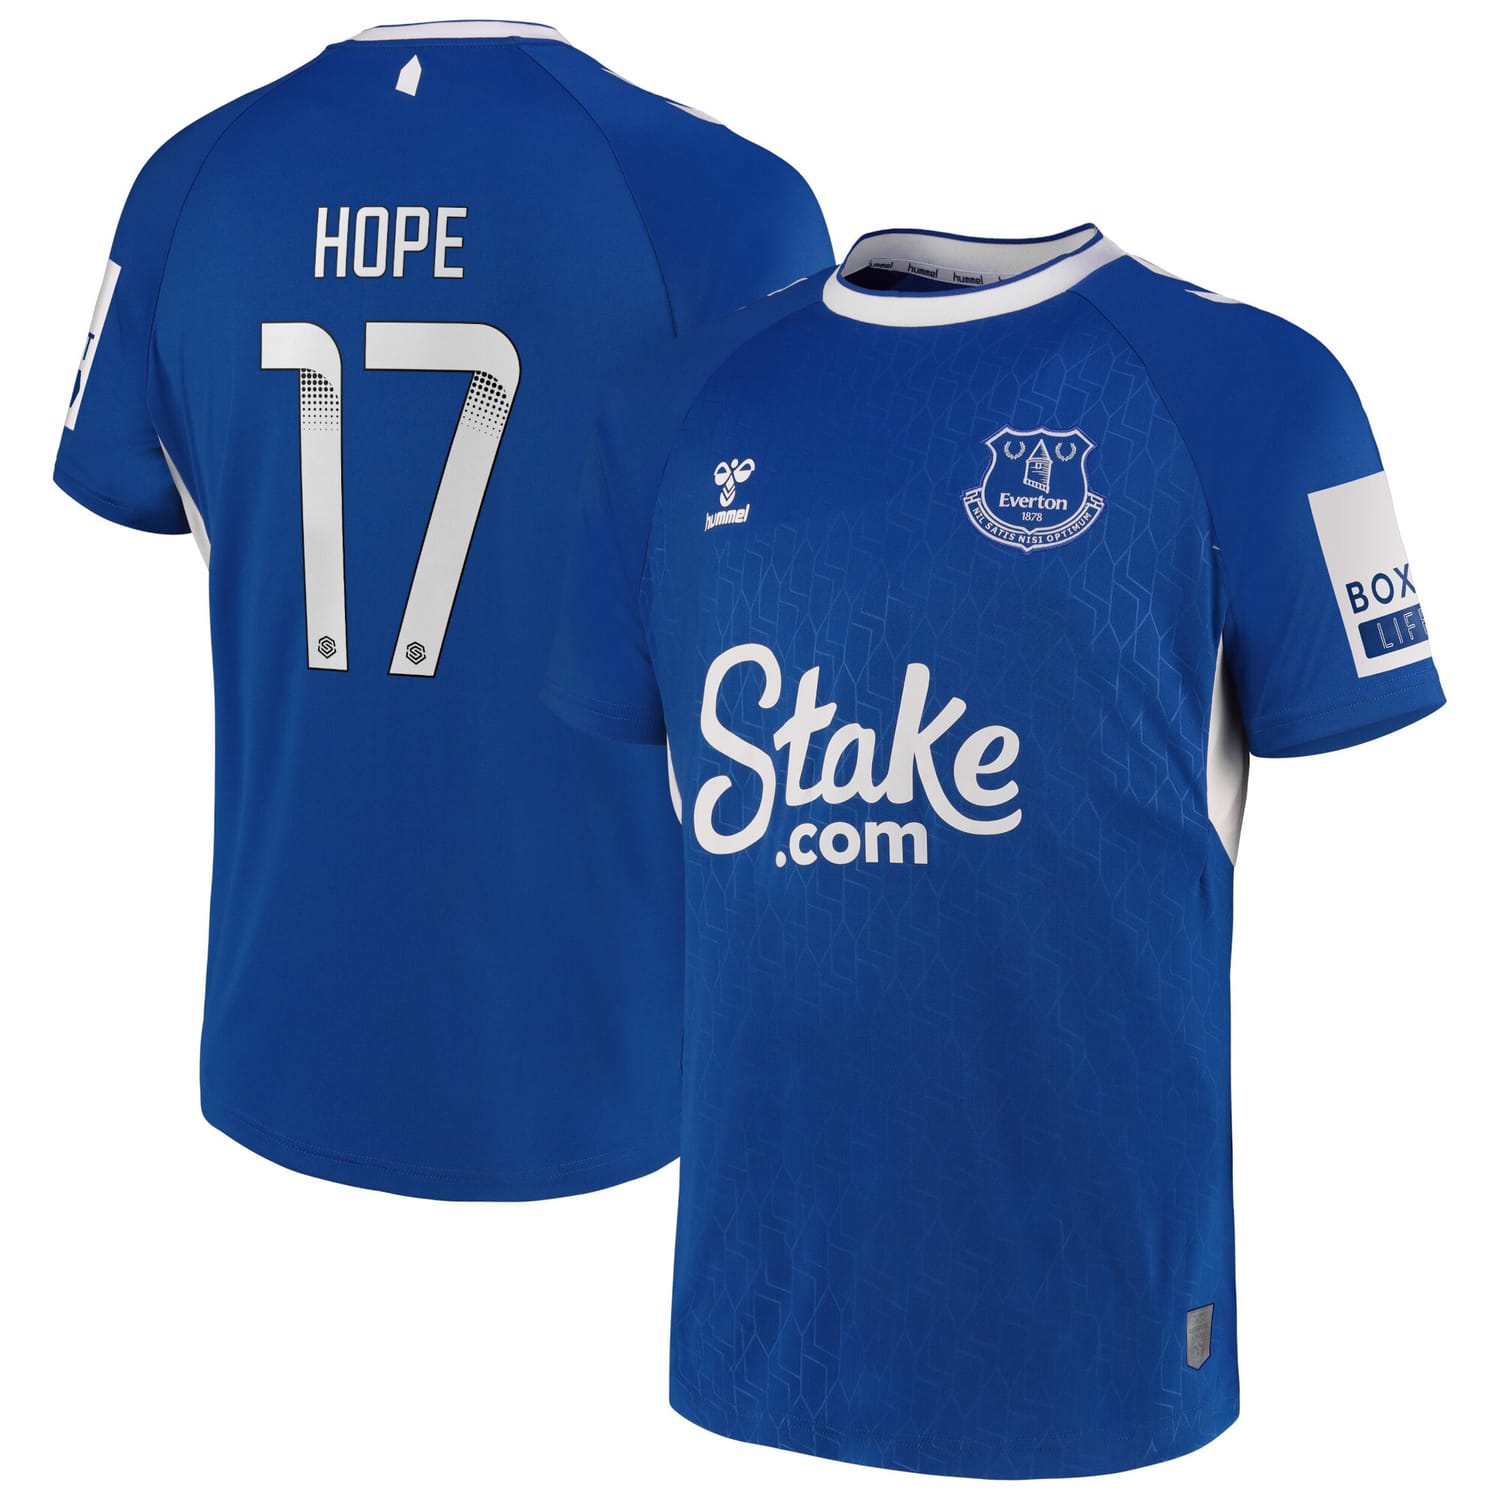 Premier League Everton Home WSL Jersey Shirt 2022-23 player Lucy Hope 17 printing for Men